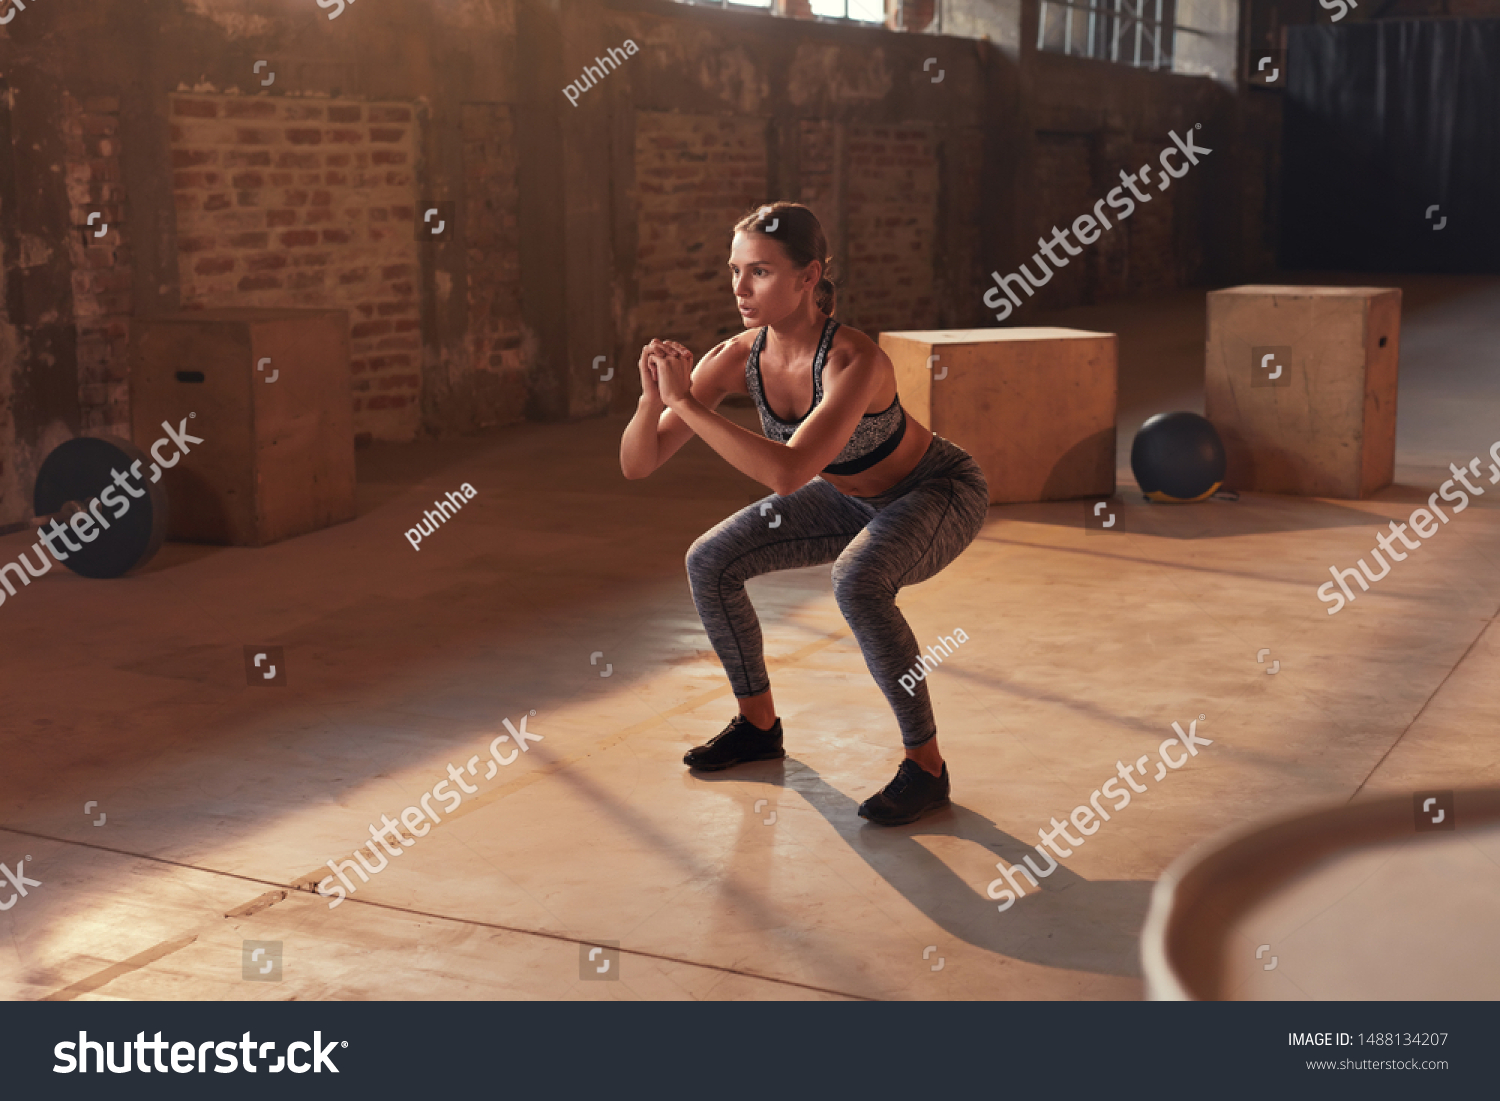 Fitness workout. Sport woman doing squat leg exercise at gym. Beautiful girl athlete with fit body in sportswear exercising, having functional training indoors #1488134207